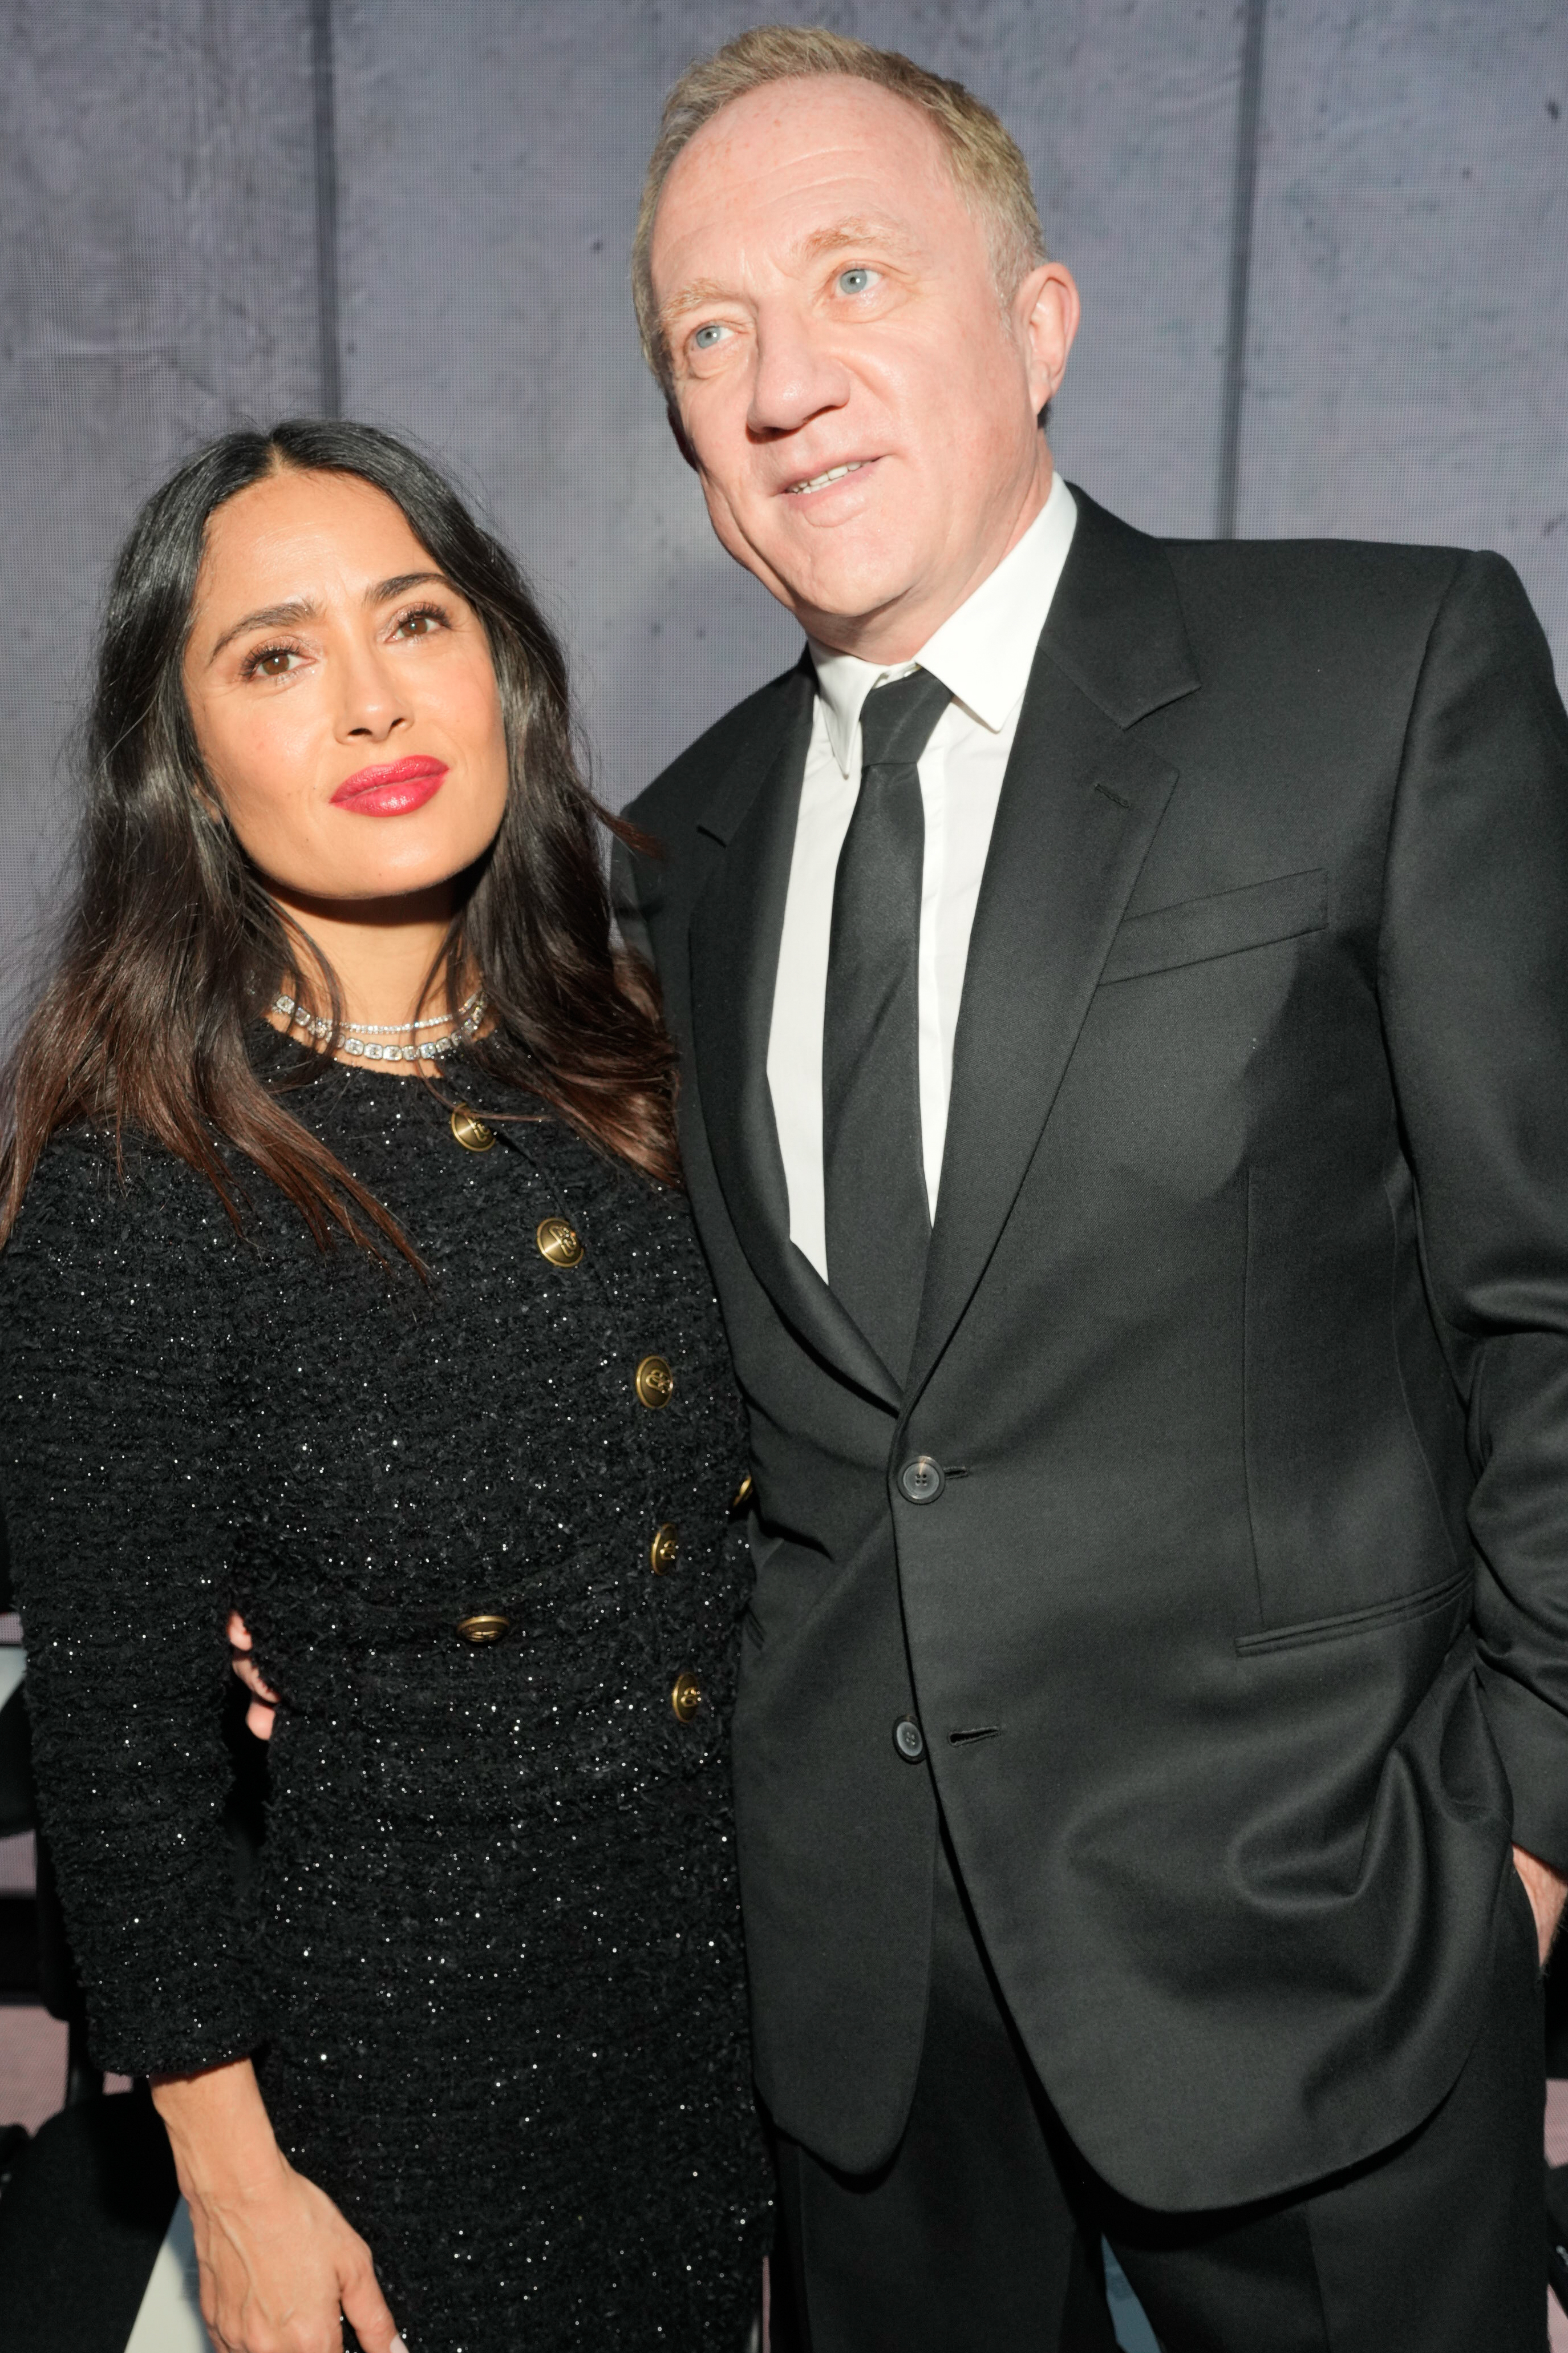 Salma and François have been married since 2009